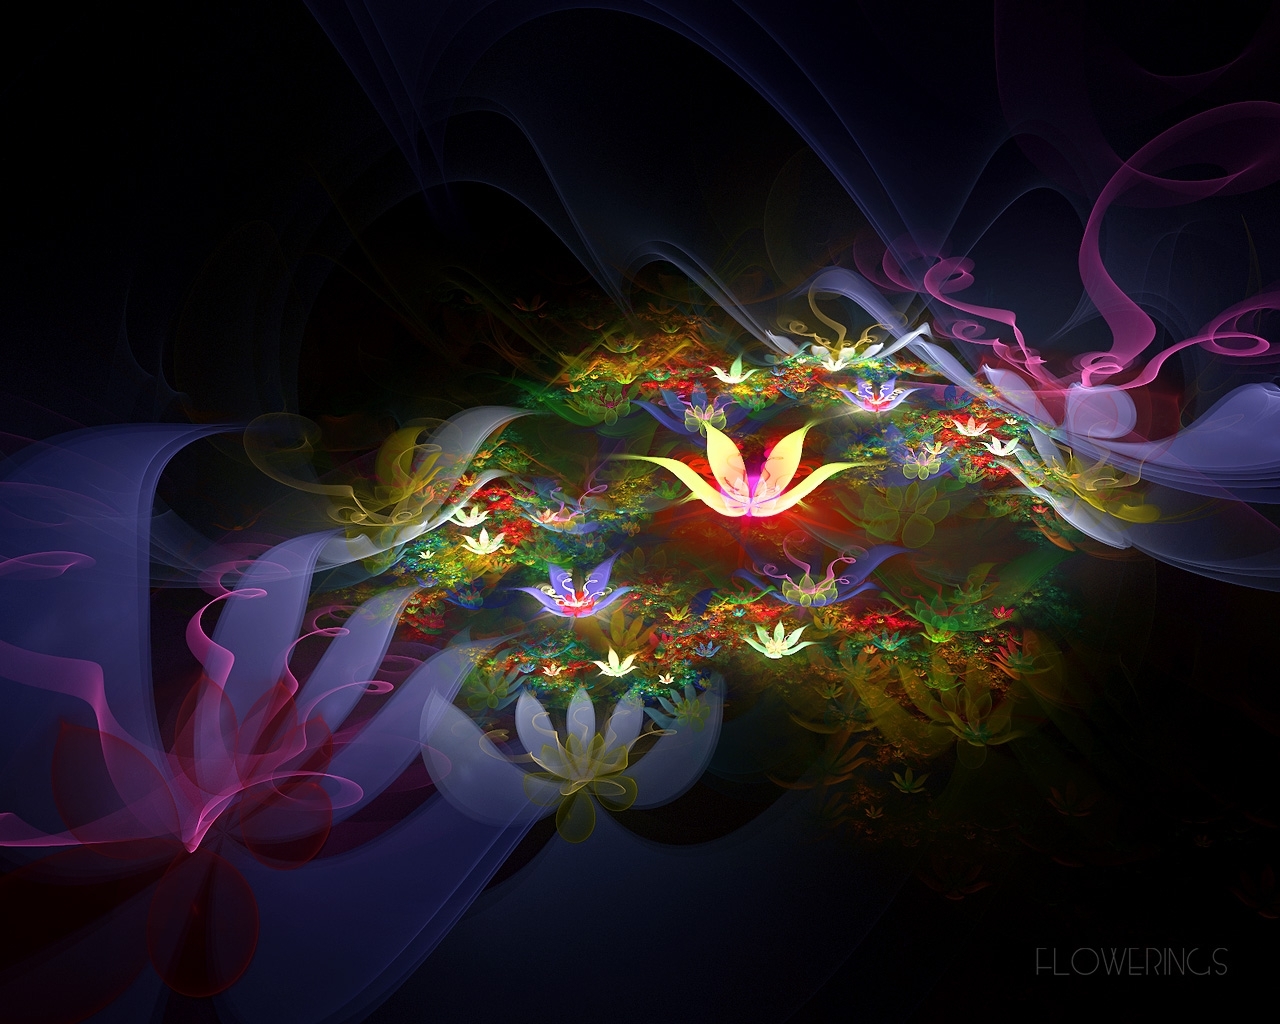 Flowers abstract, background, black 4k Wallpaper